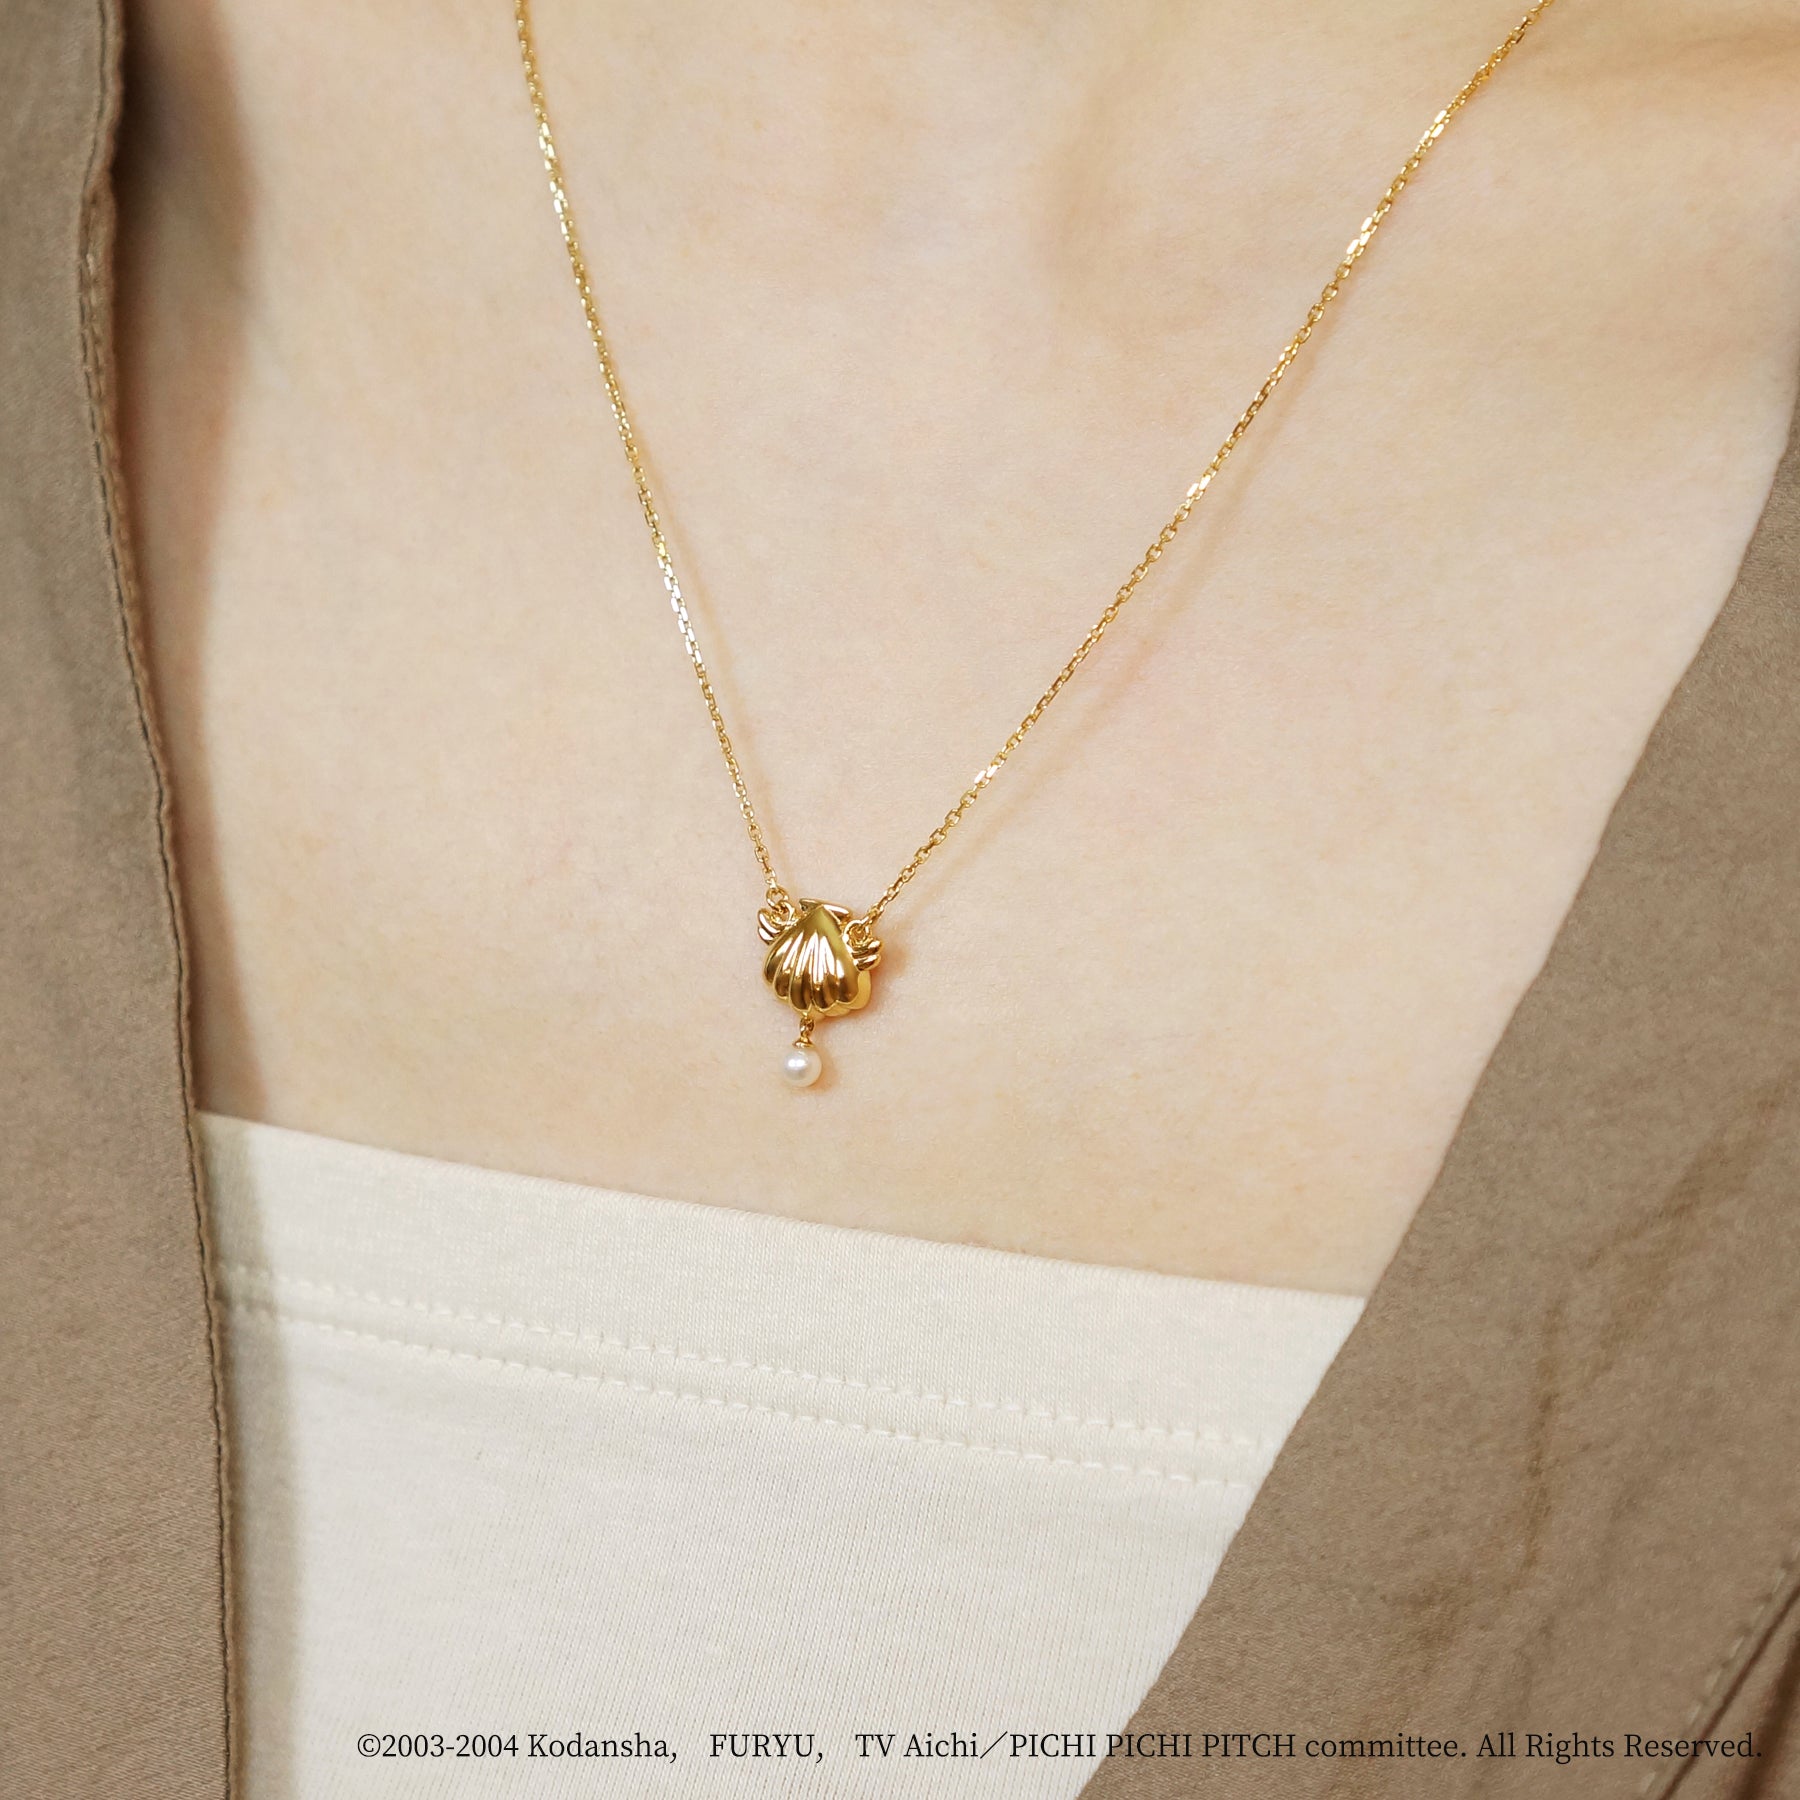 Mermaid Melody Pichi Pichi Pitch - Reversible Necklace (Rina Toin) - Model Image